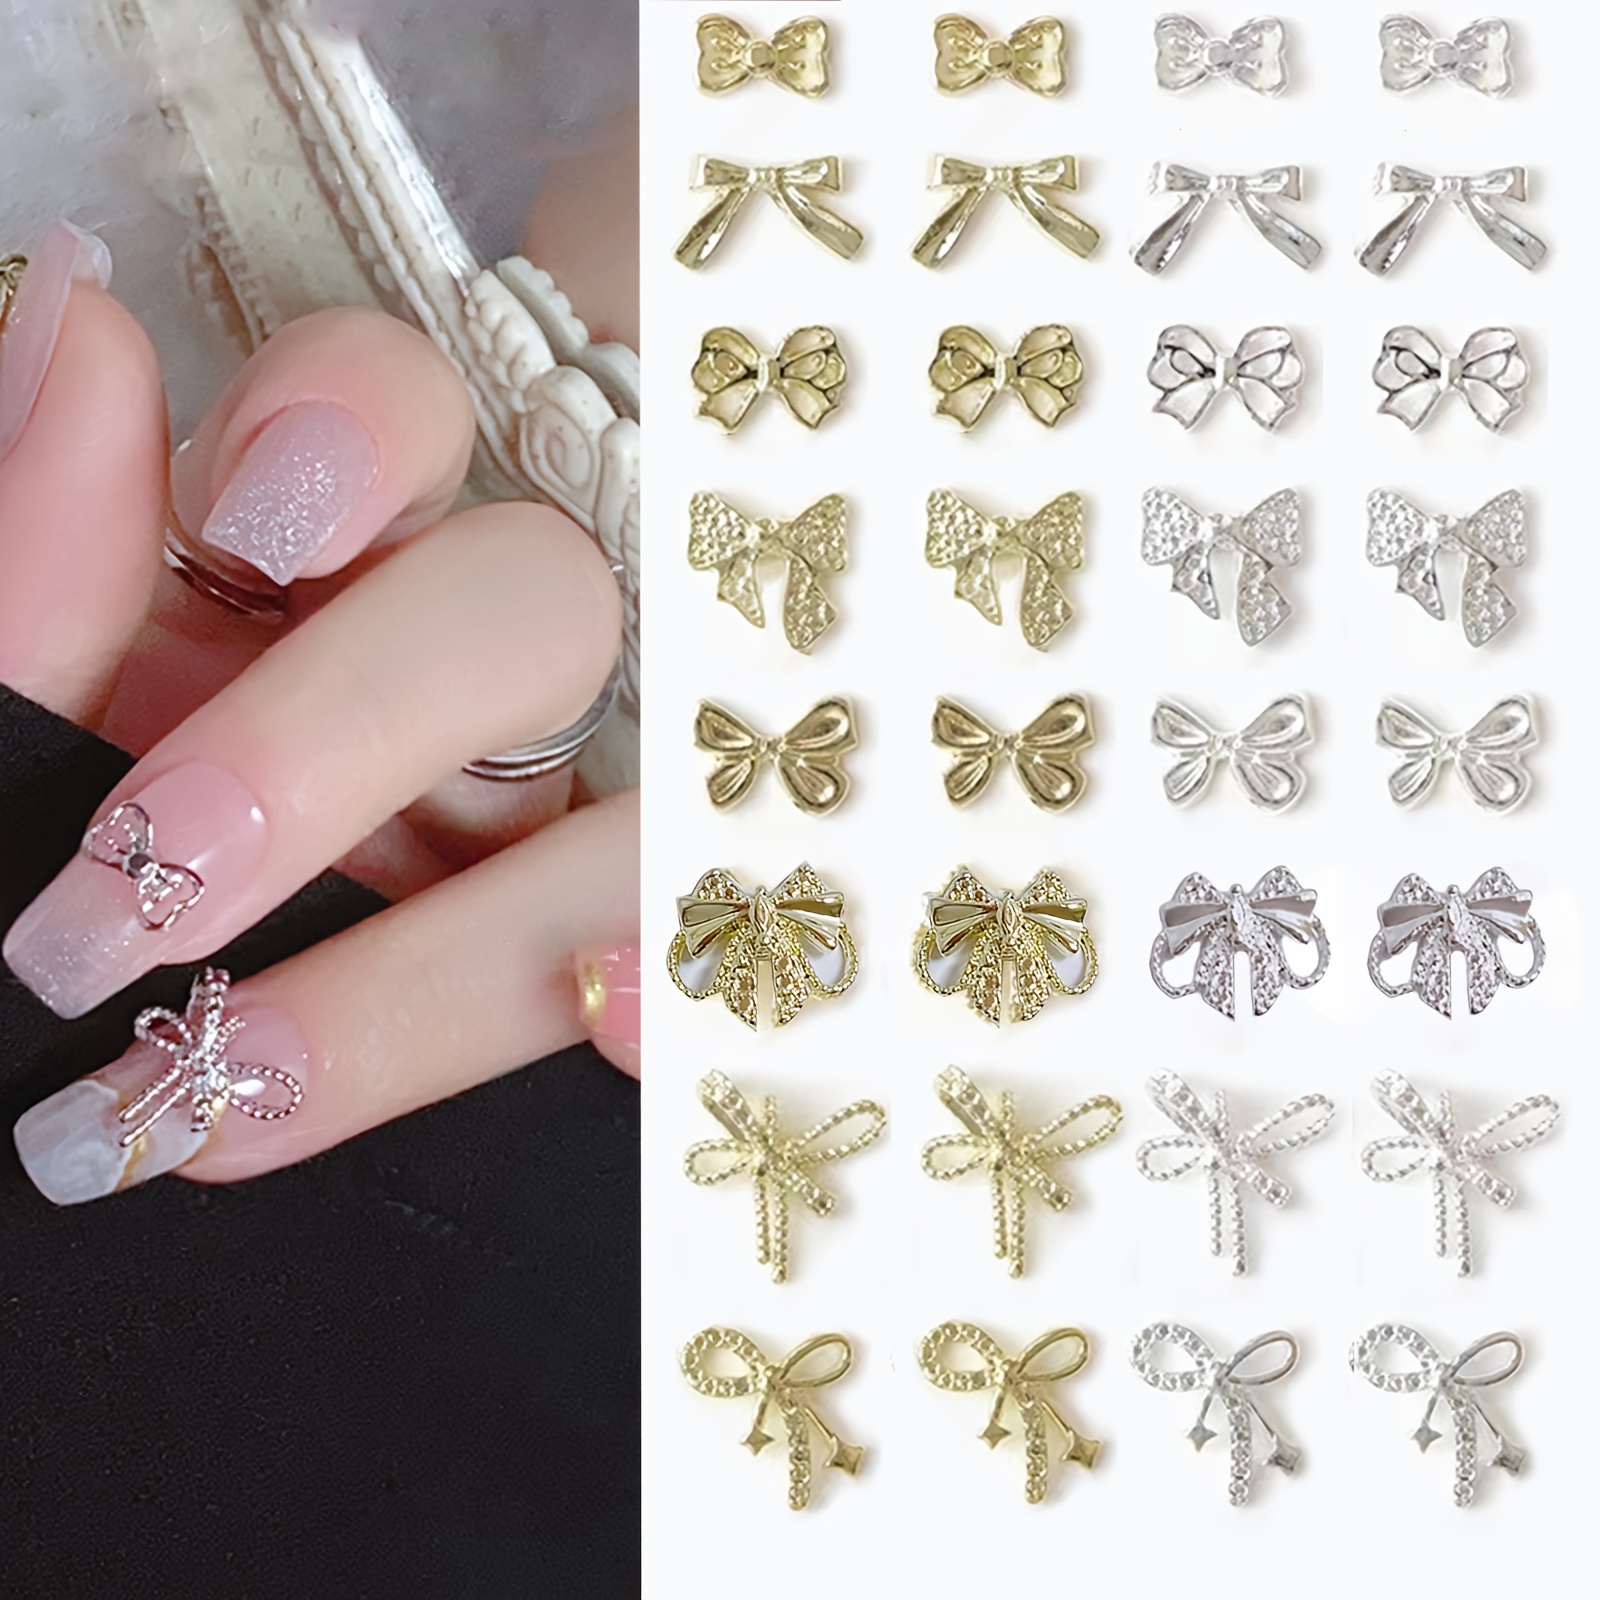 60 Pieces Skull Nail Charms Spider Skull 3D Spider with Rhinestones Vintage  Alloy Skeleton Hand Nail Art Jewelry Decor Nail Art Glitters for Nail Tip